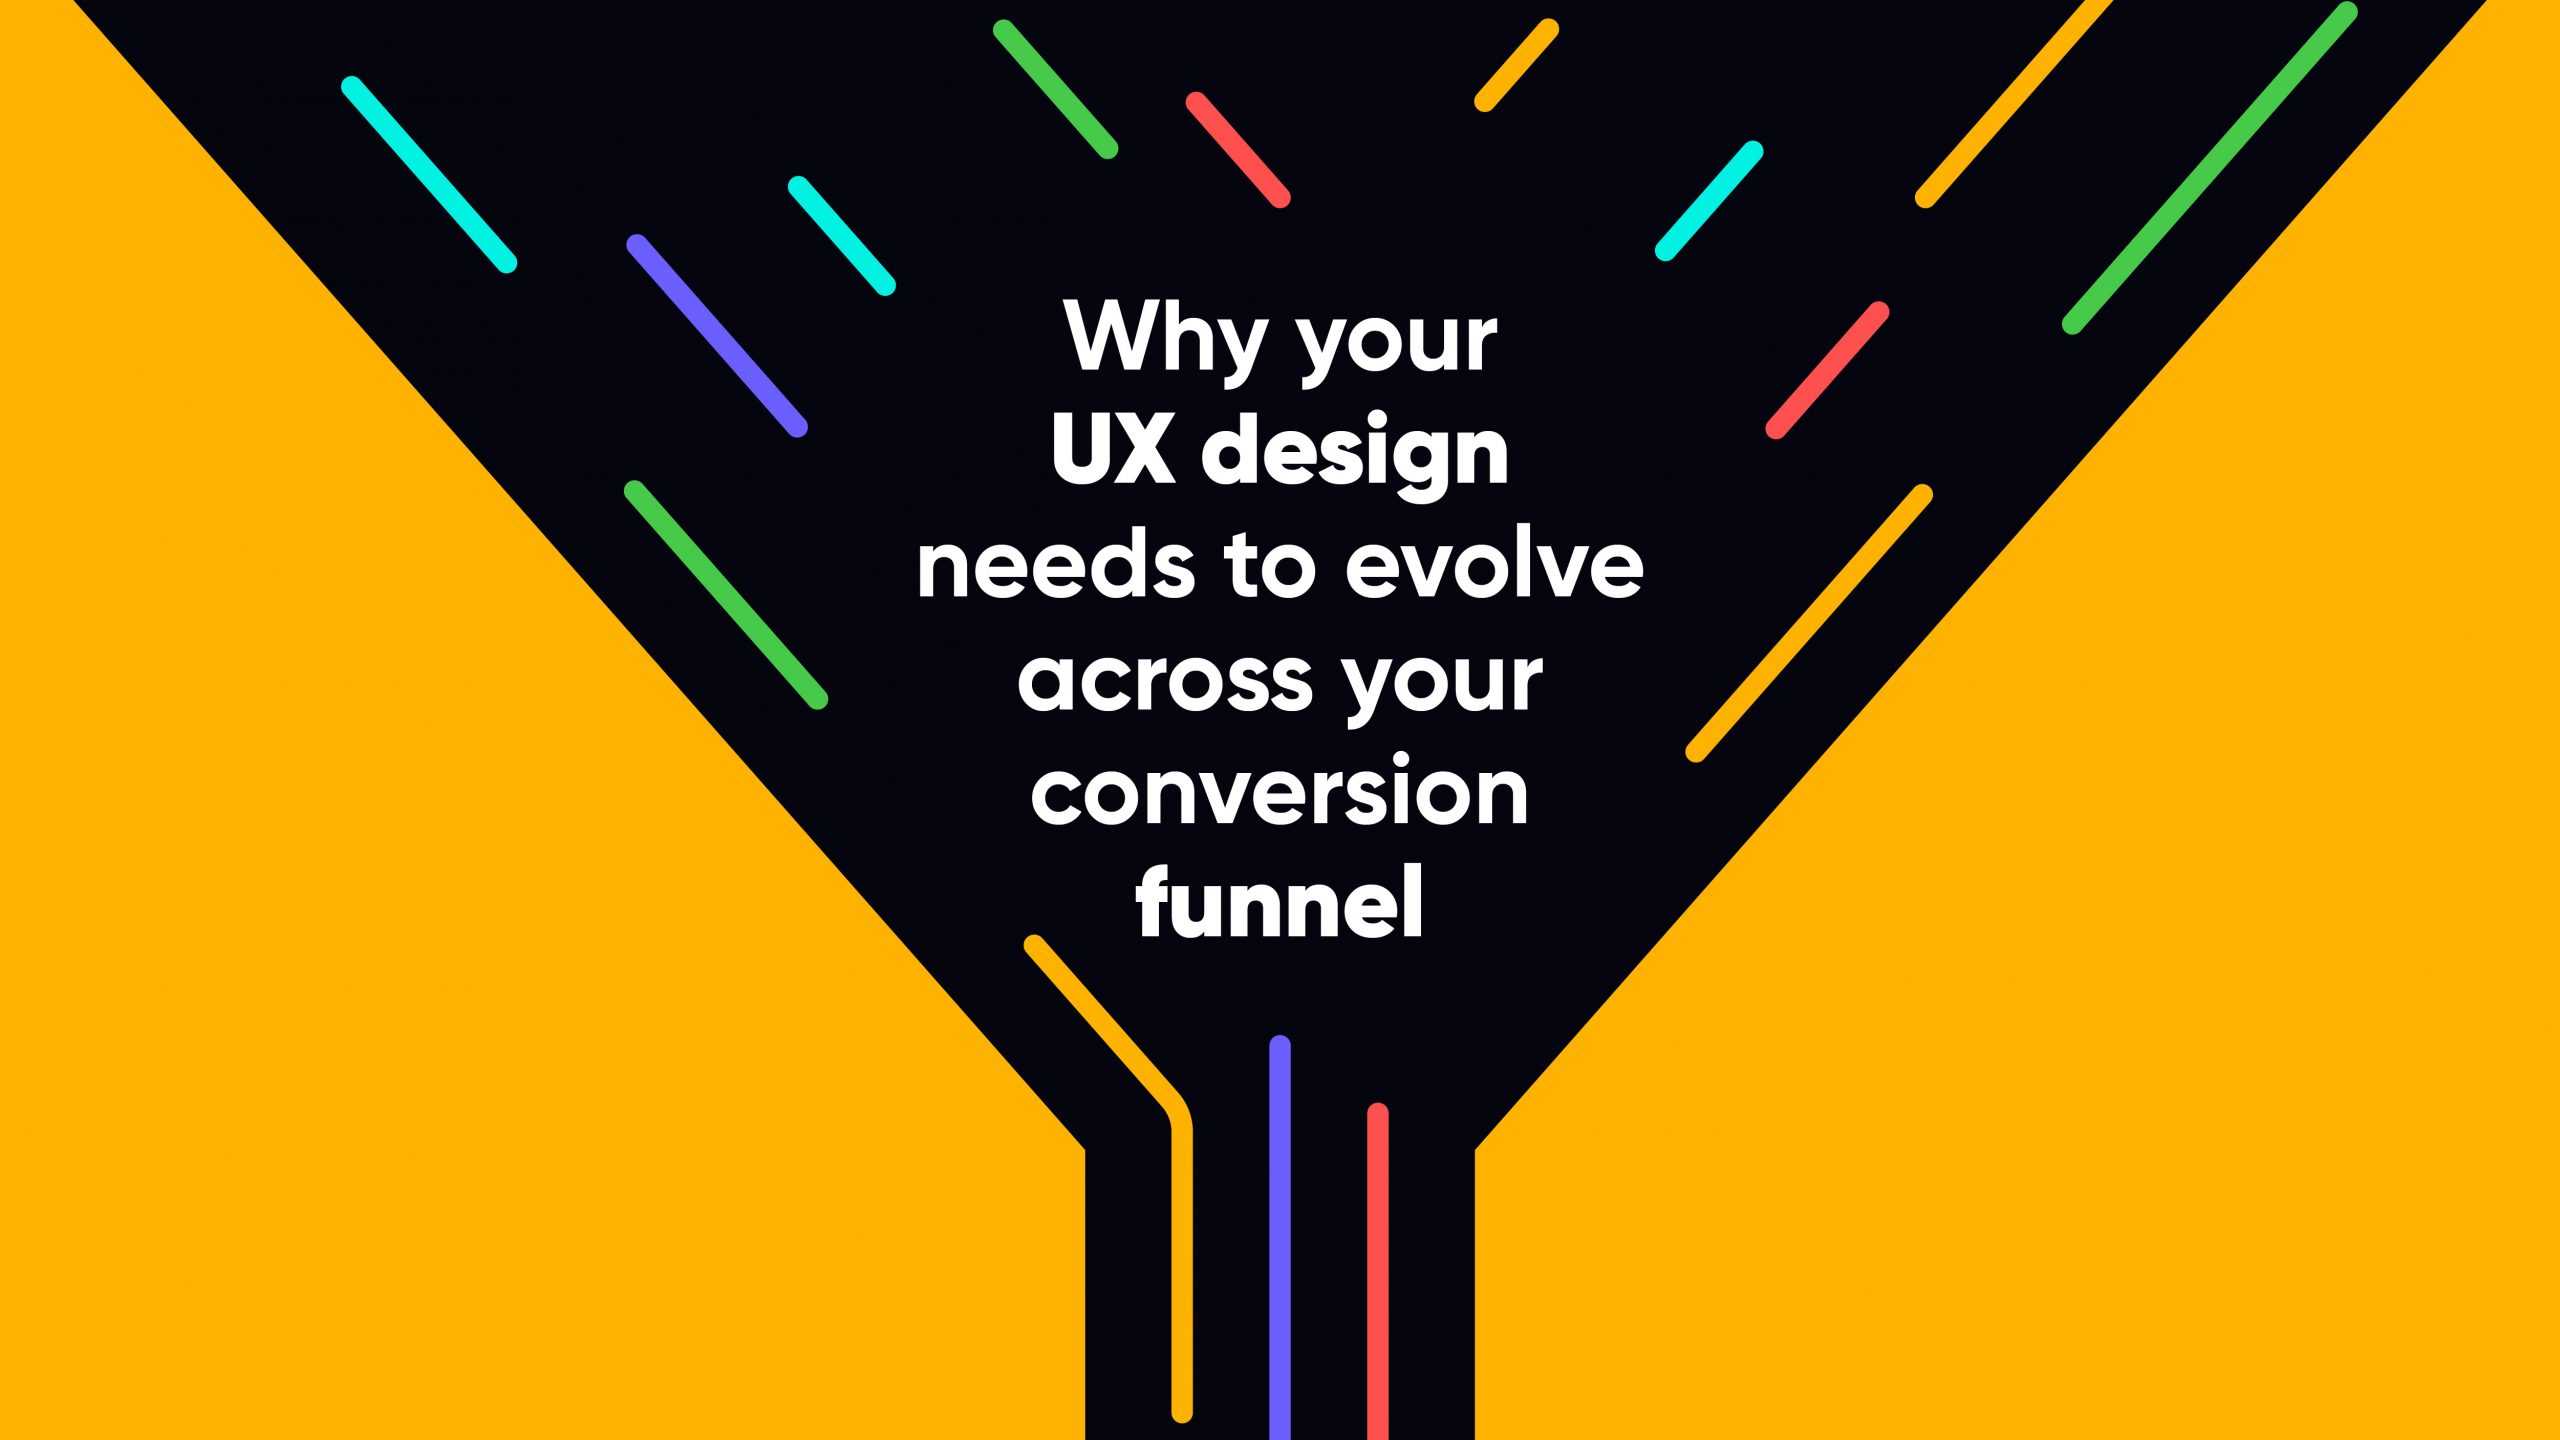 Why Your UX Design Needs To Evolve Across Your Conversion Funnel | WowMakers